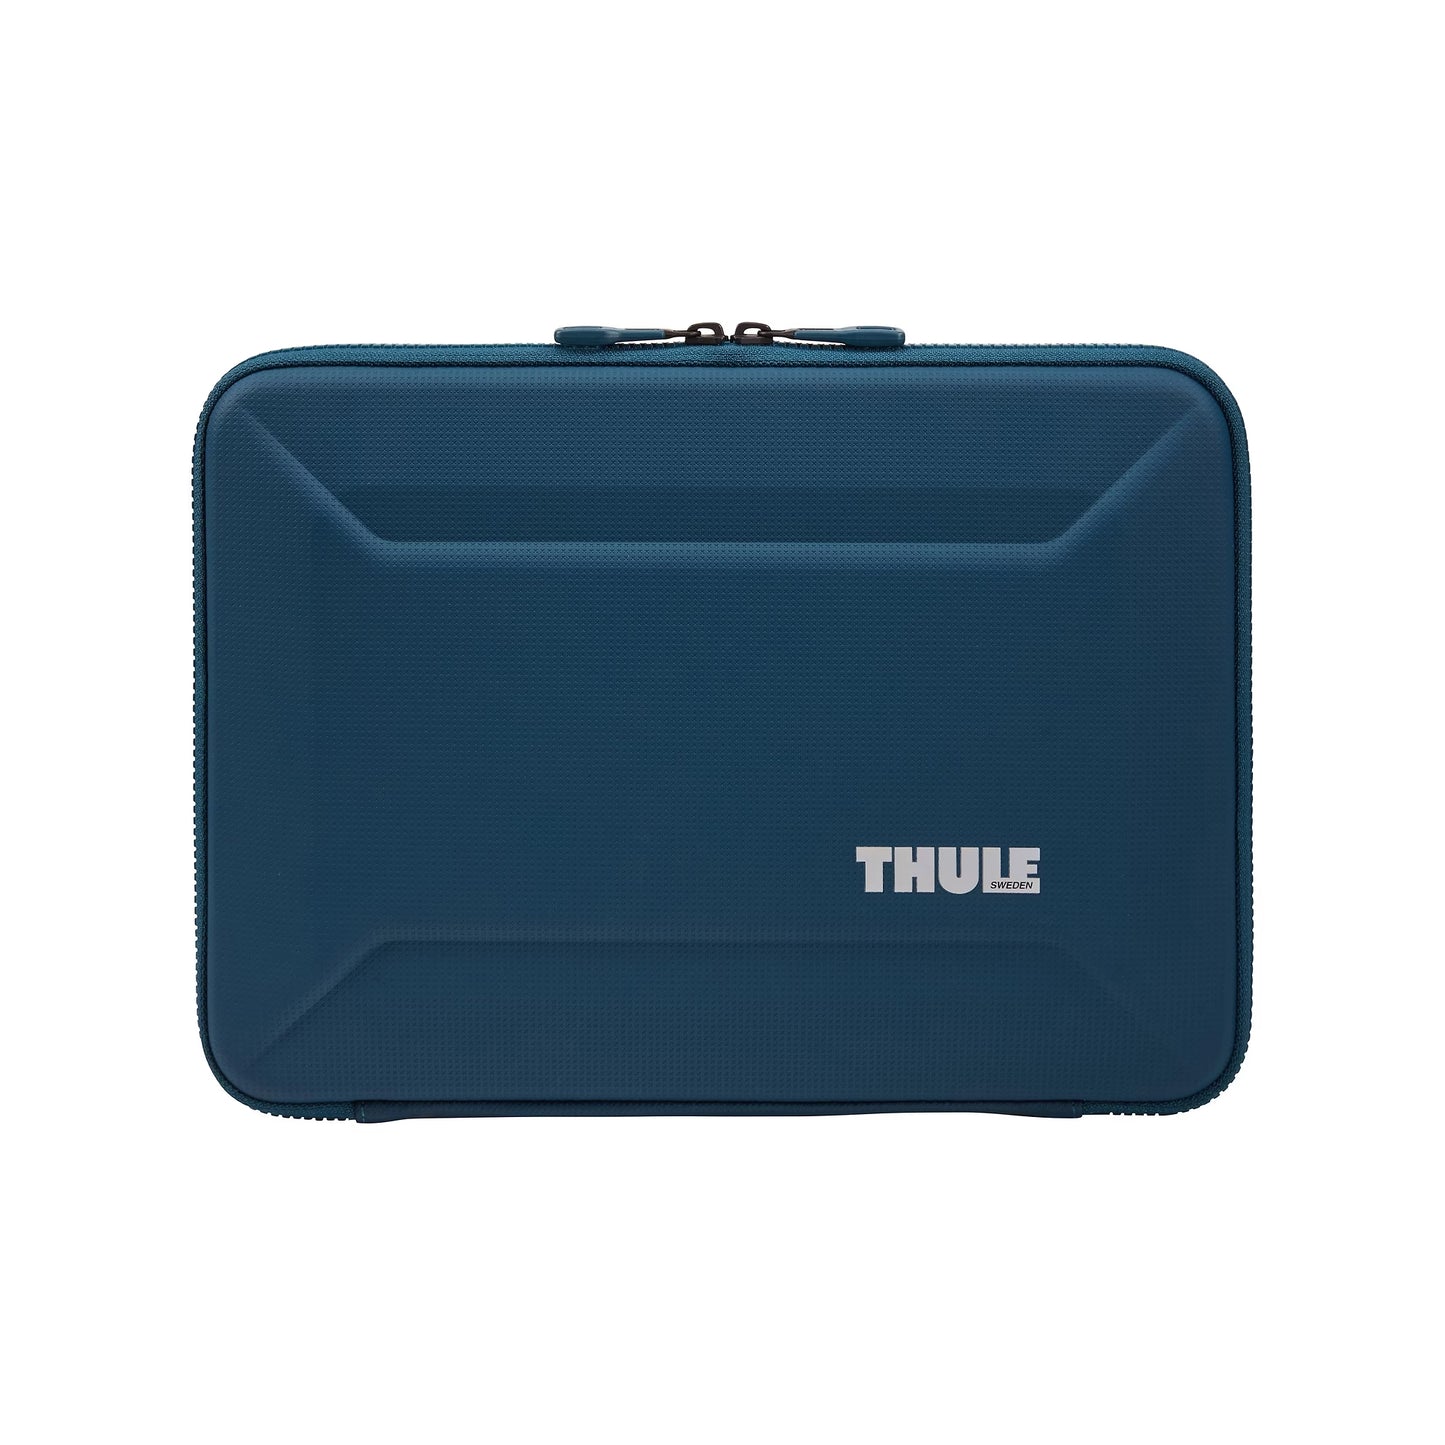 Thule Gauntlet 4.0 Sleeve for MacBook Pro 16" - Blue (Barcode: 0085854250054 )